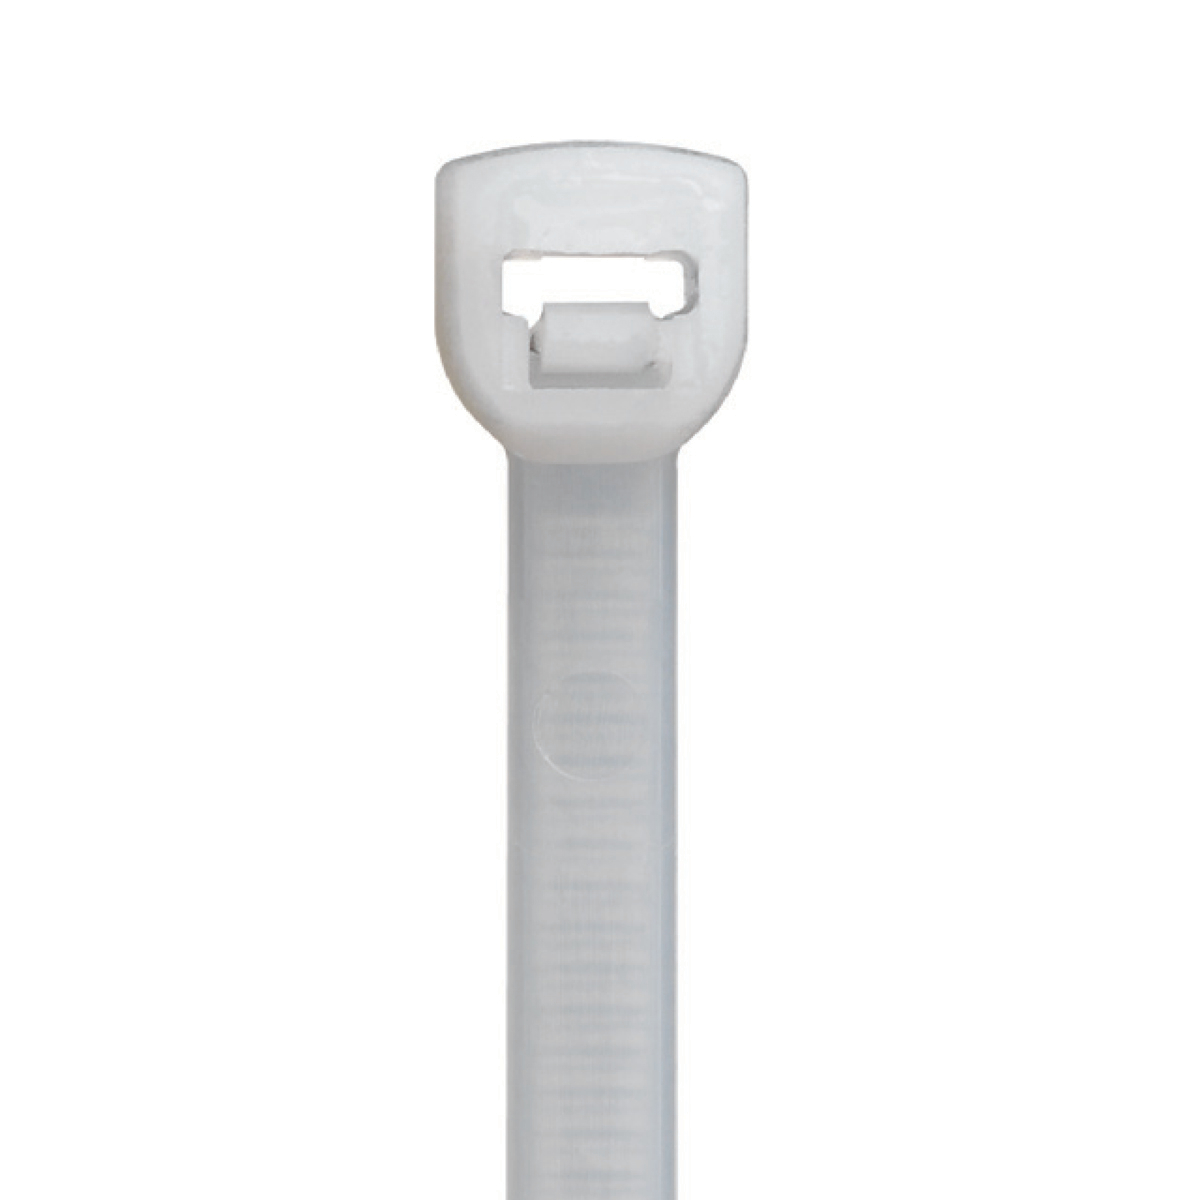 L-11-40-9-C Cable Tie Catamount;ABB - Installation Products